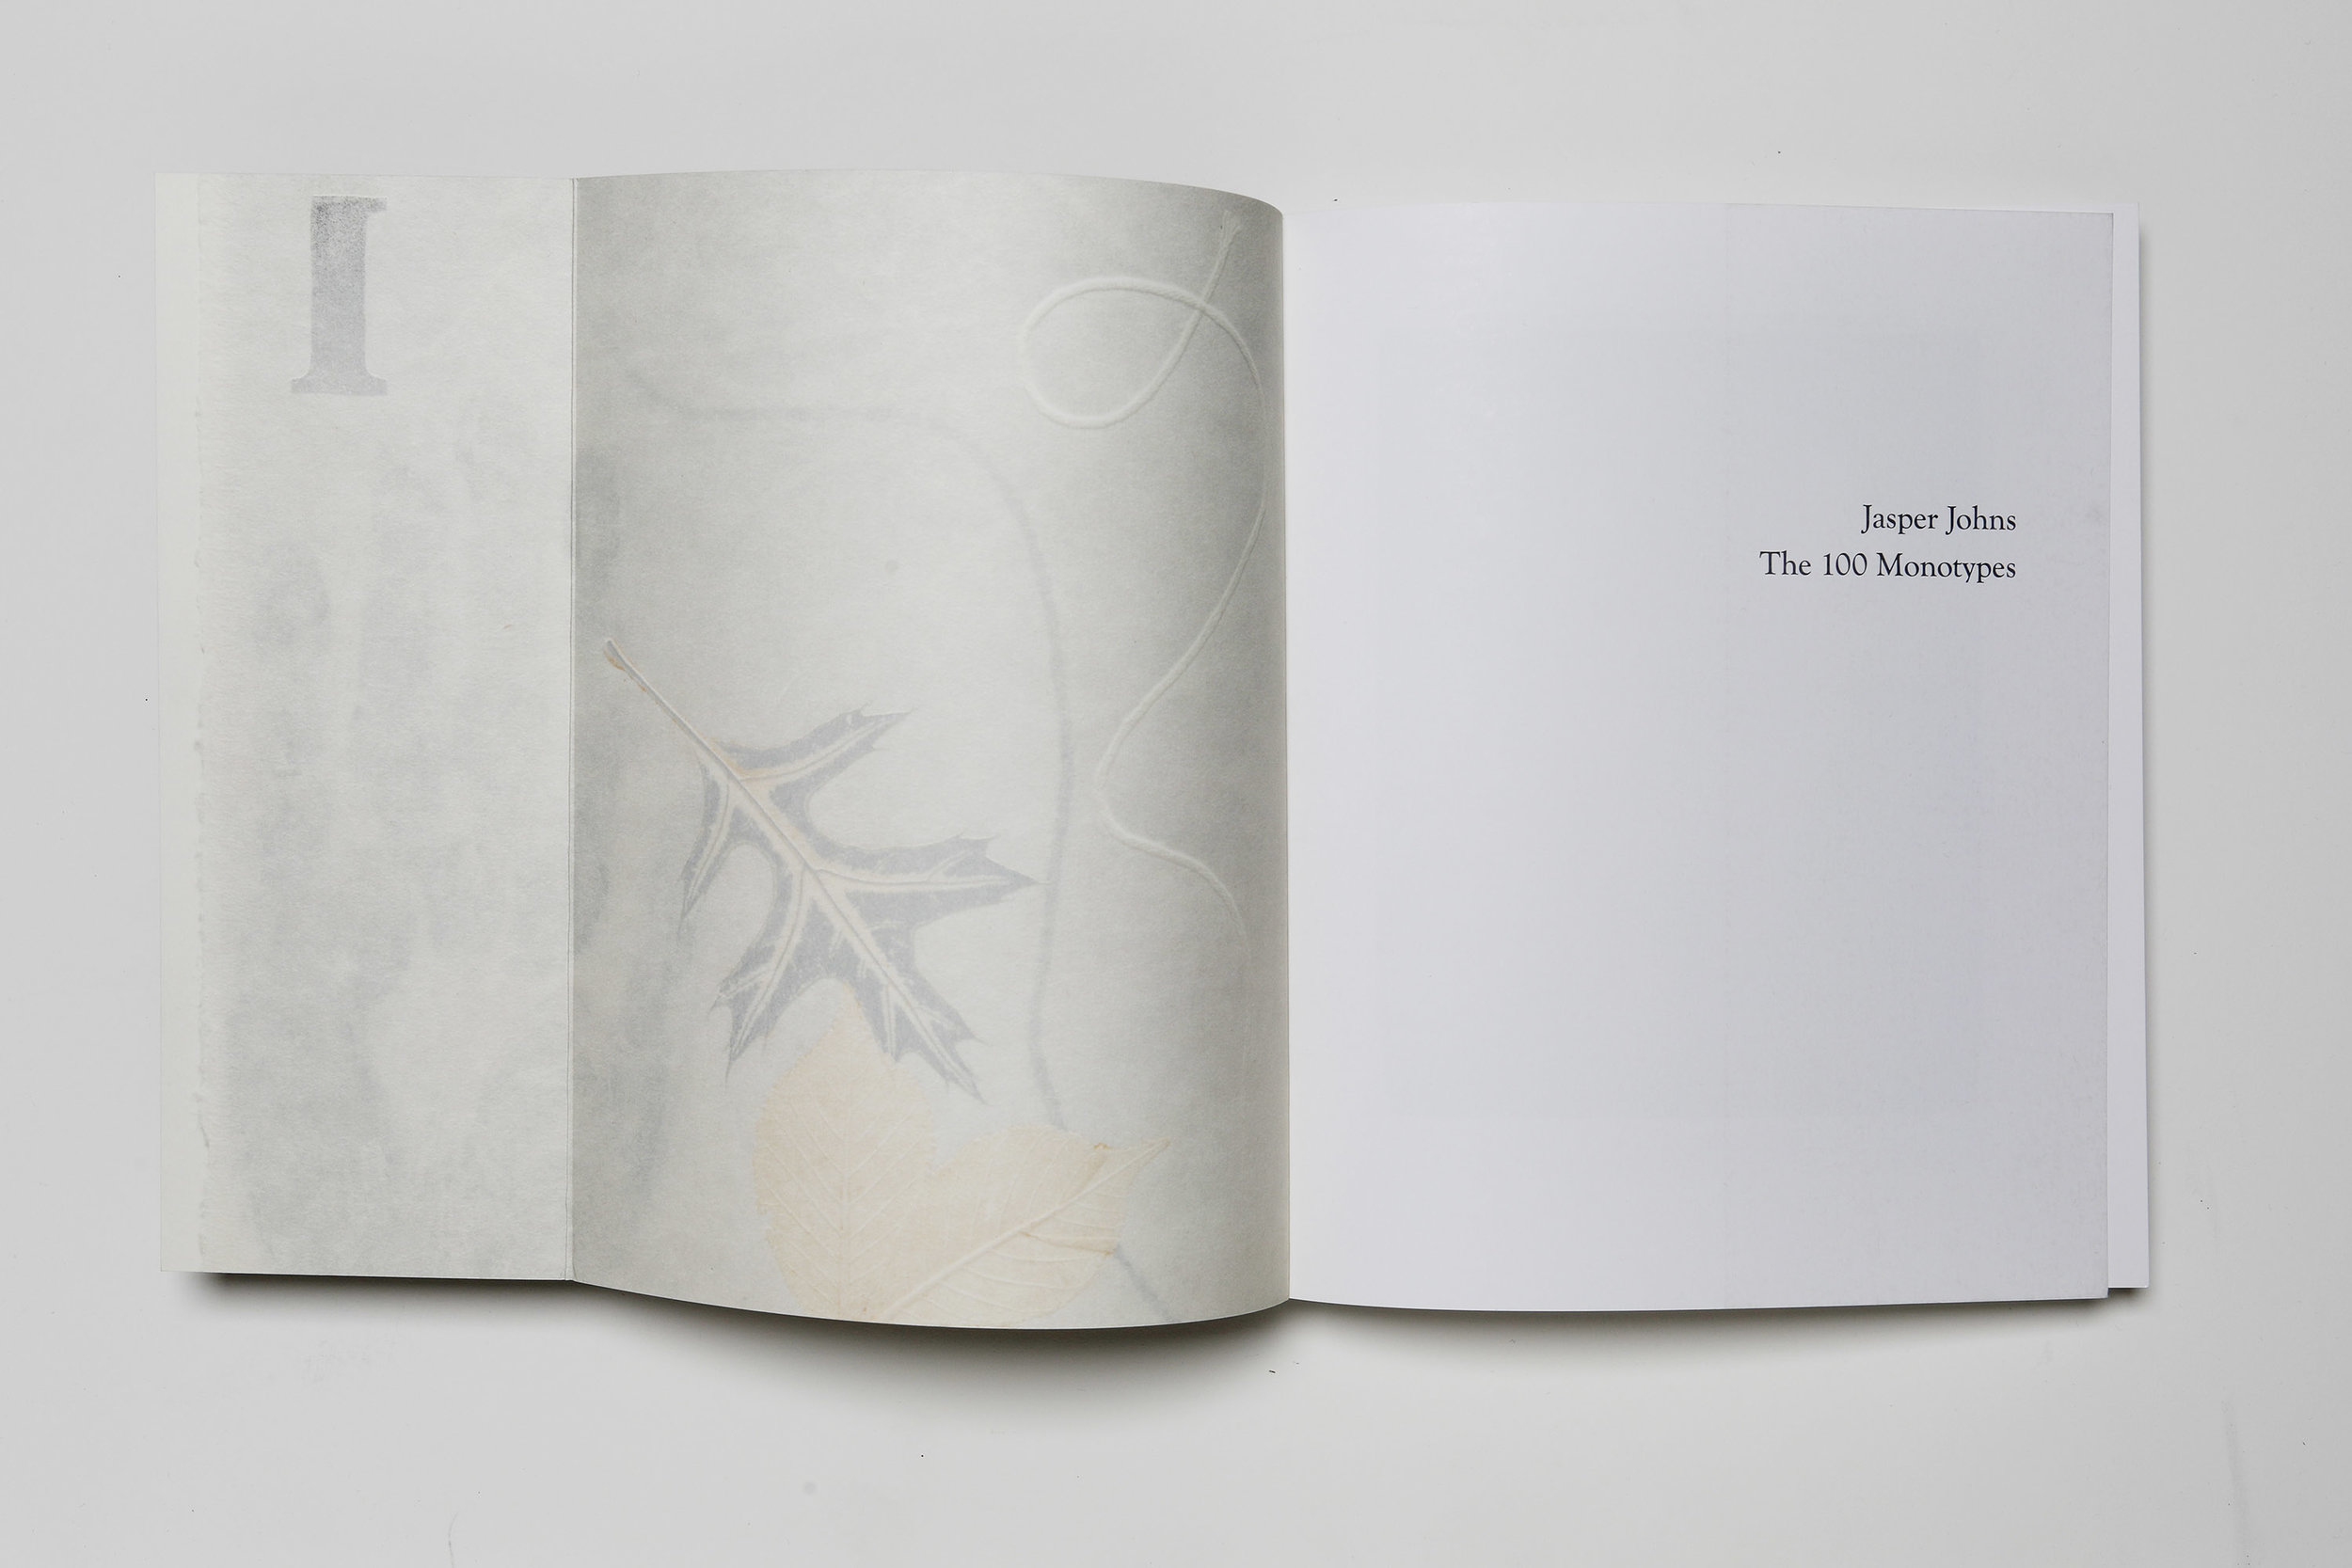  Jasper Johns: The 100 Monotypes, Softcover, front interior flap 